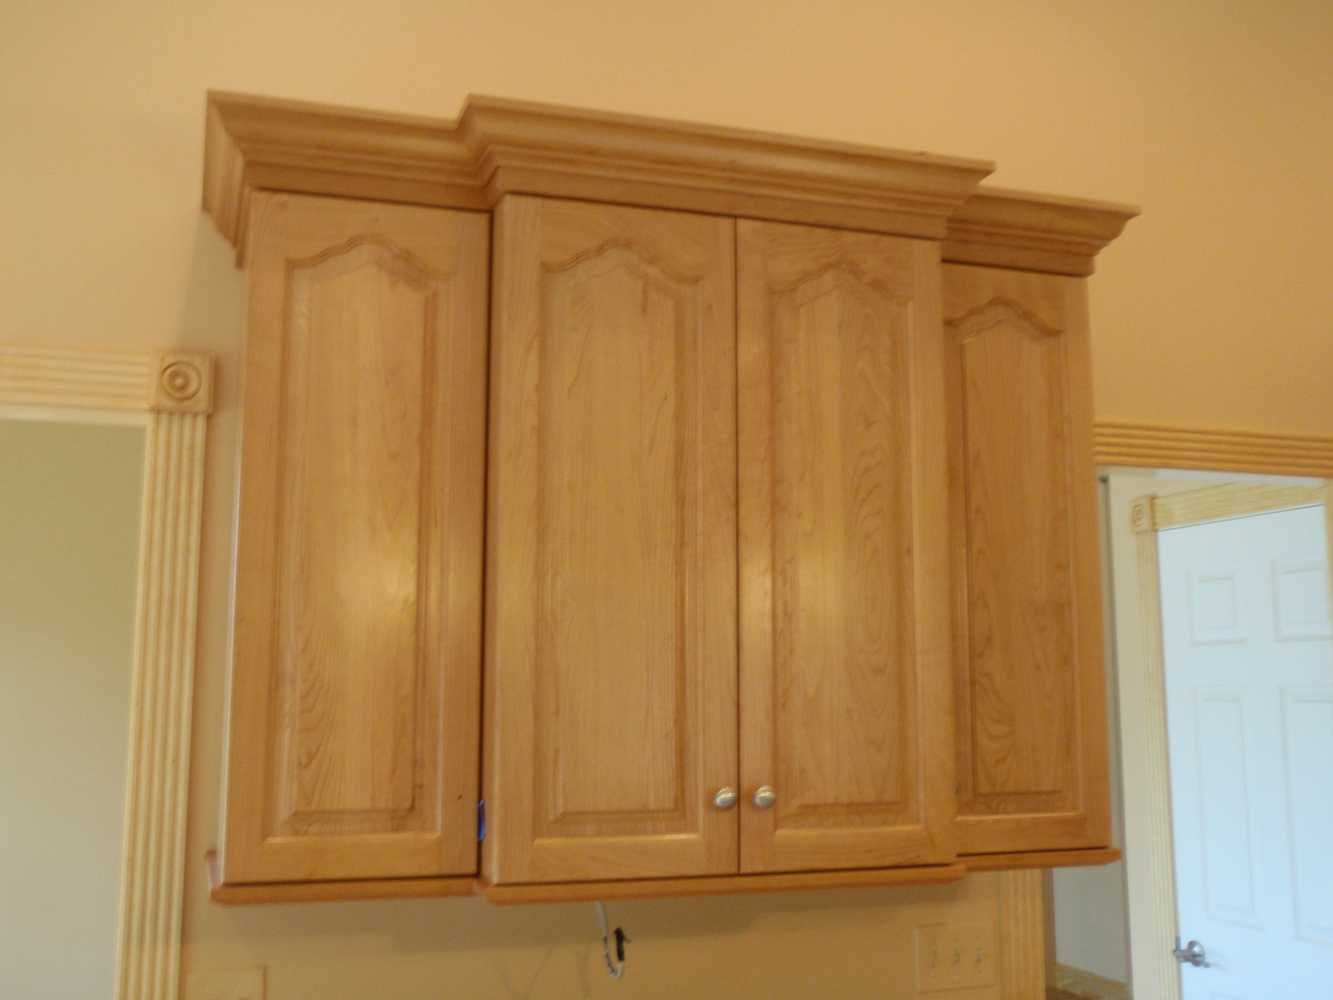 Examples of Kitchen Installs